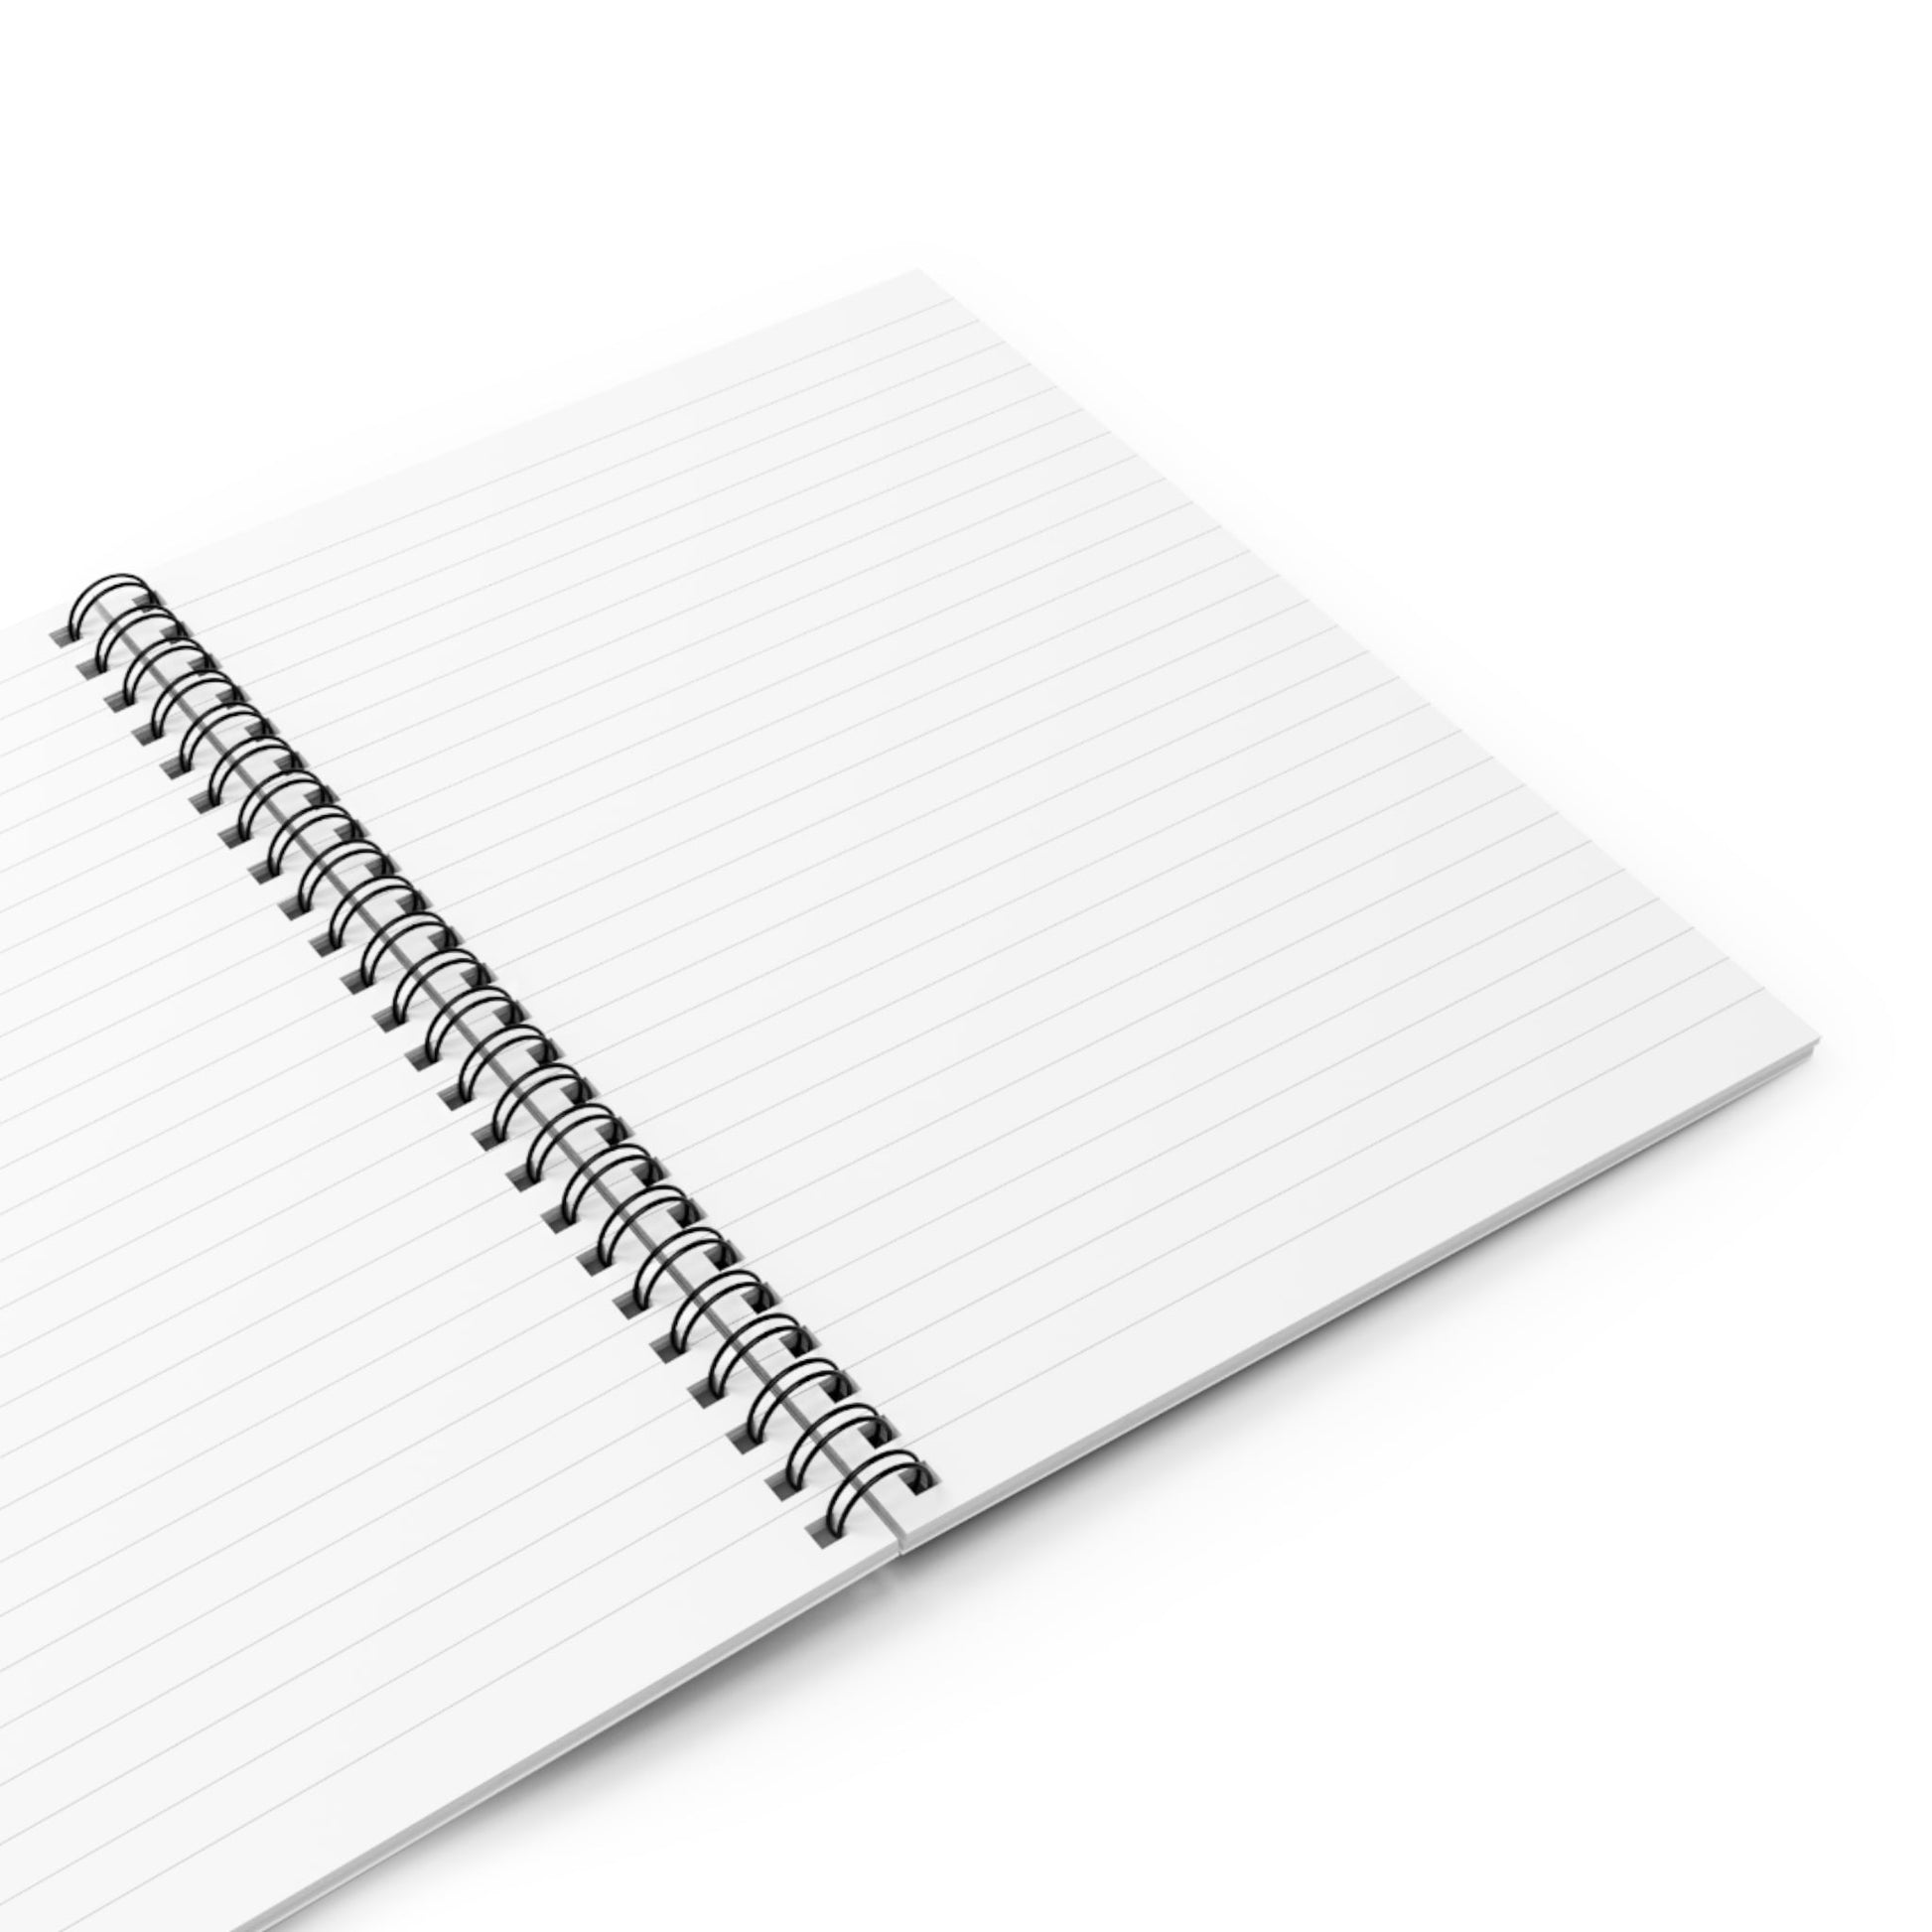 Spiral Notebook with Japanese Cover Opened with Blank White College Ruled Pages